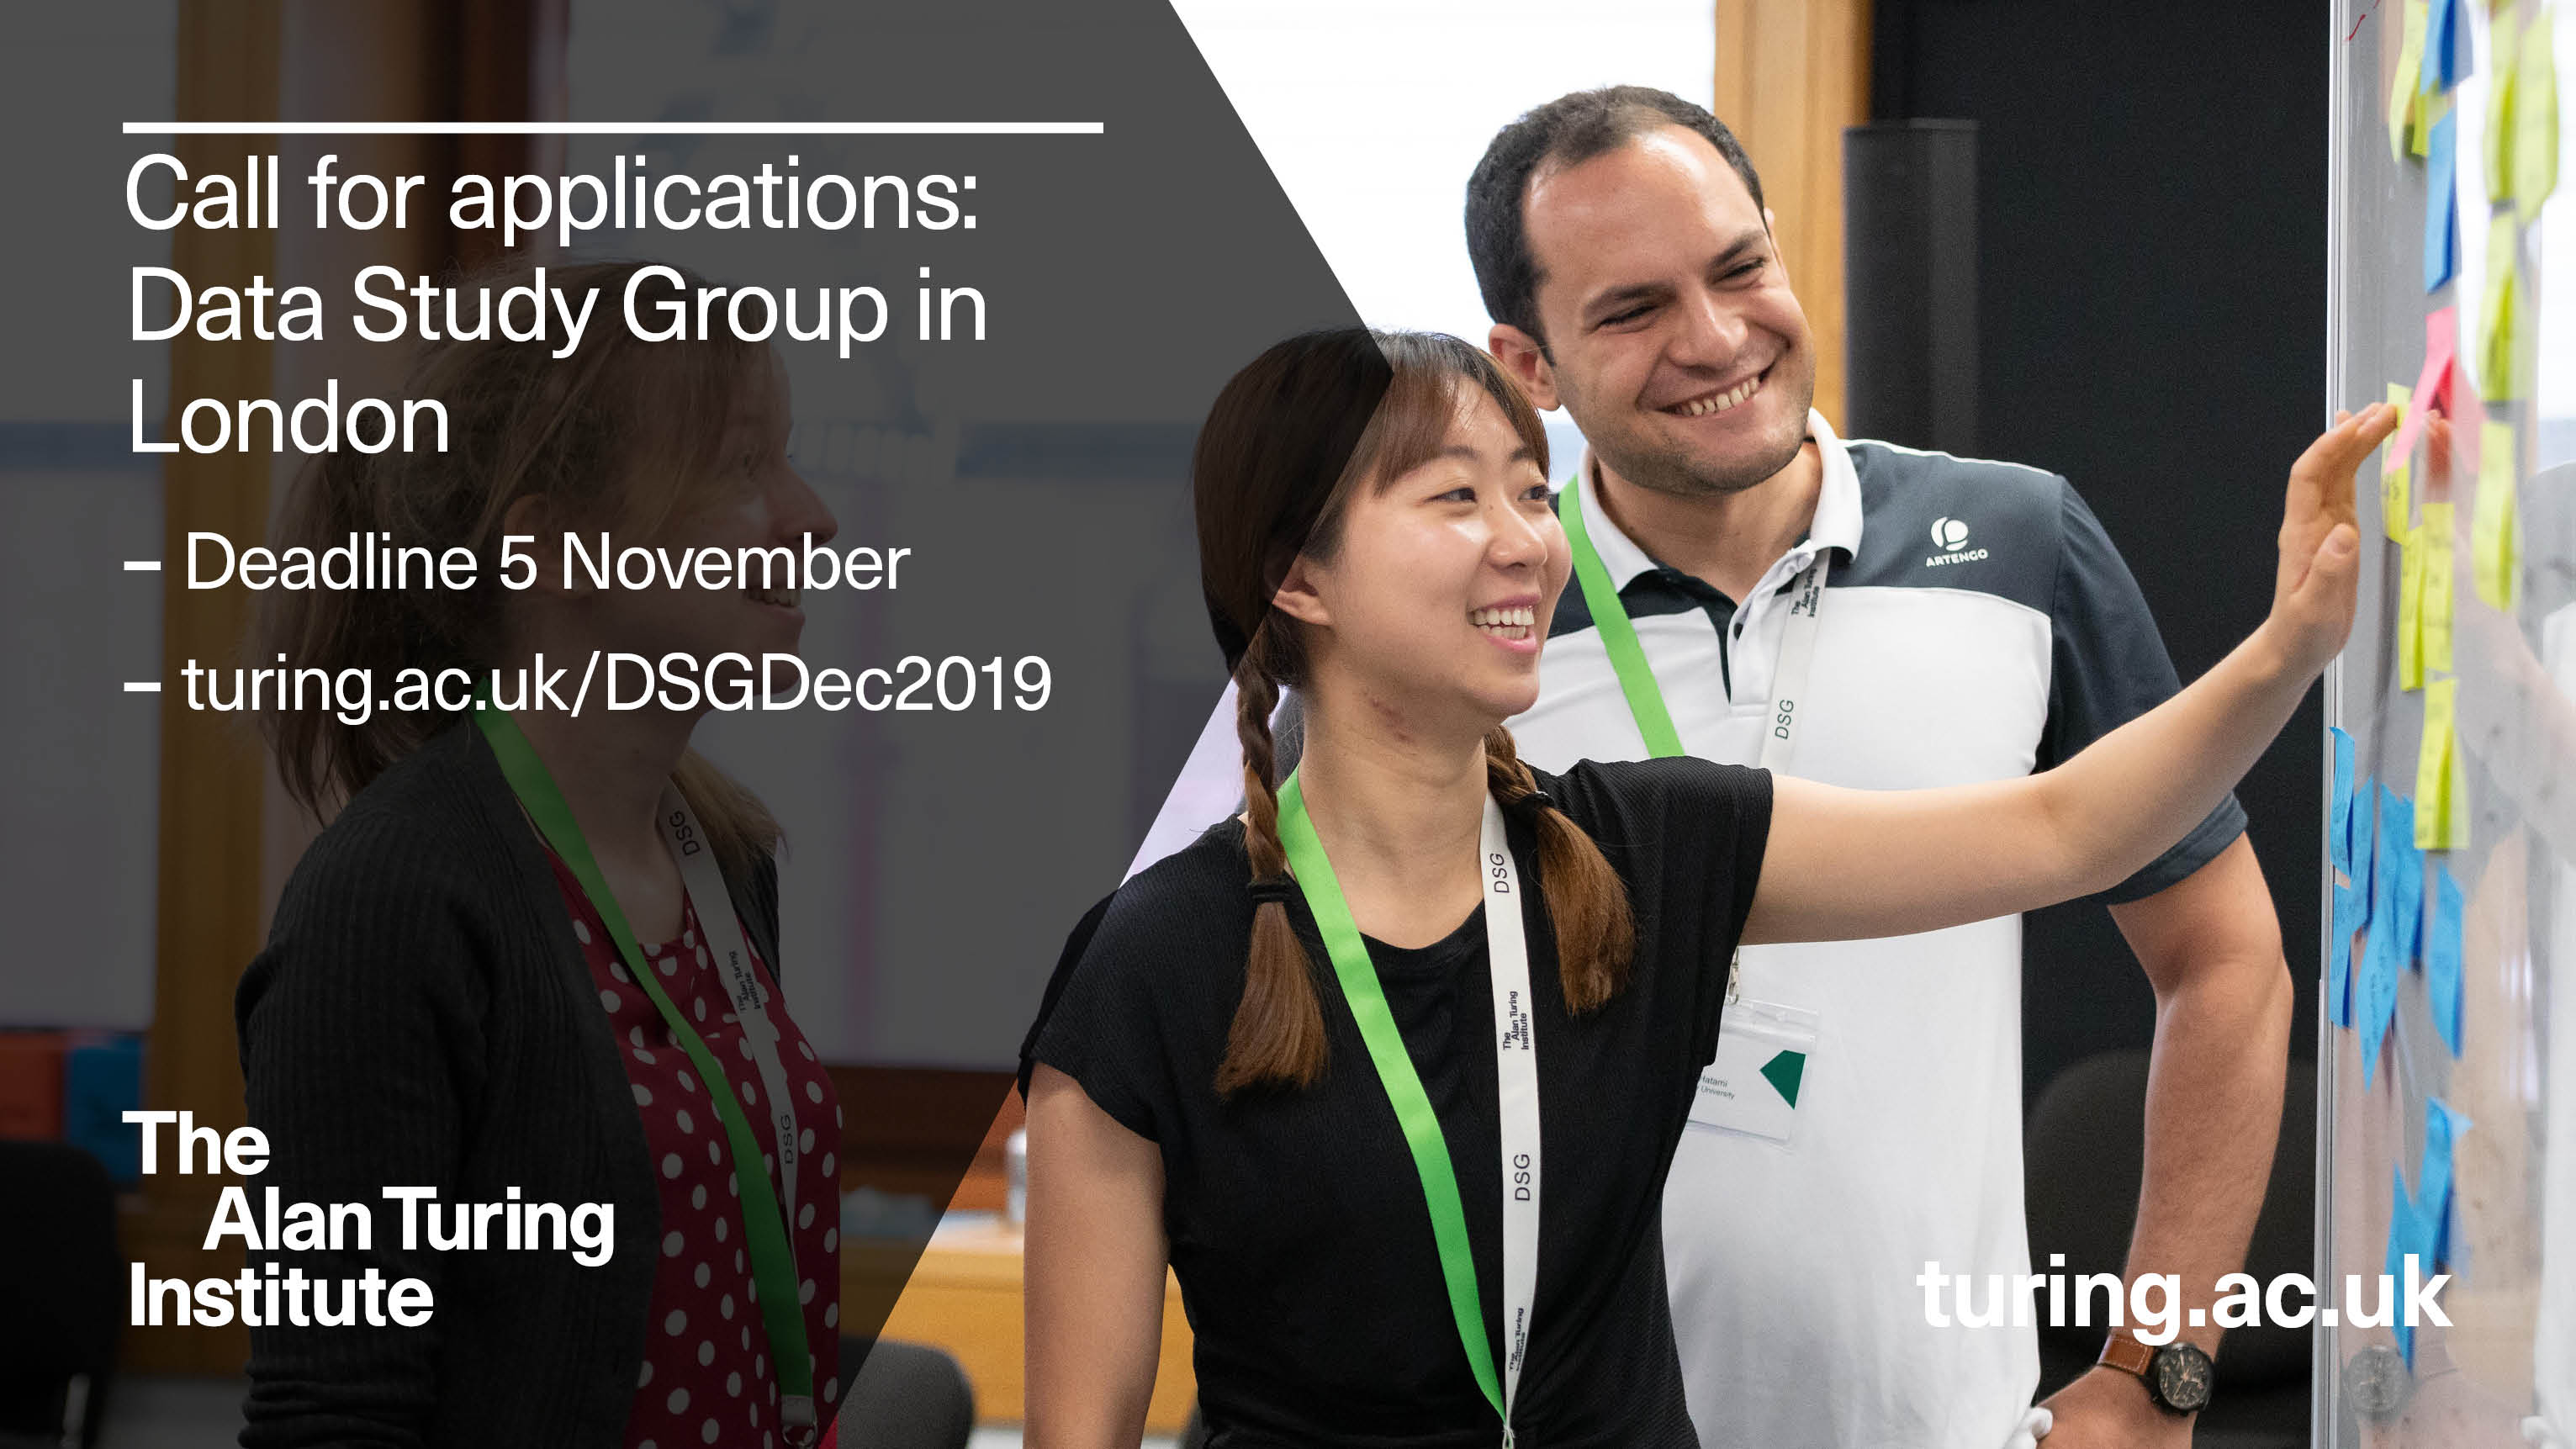 Turing Institute Data Study Group call for applications advert December 2019